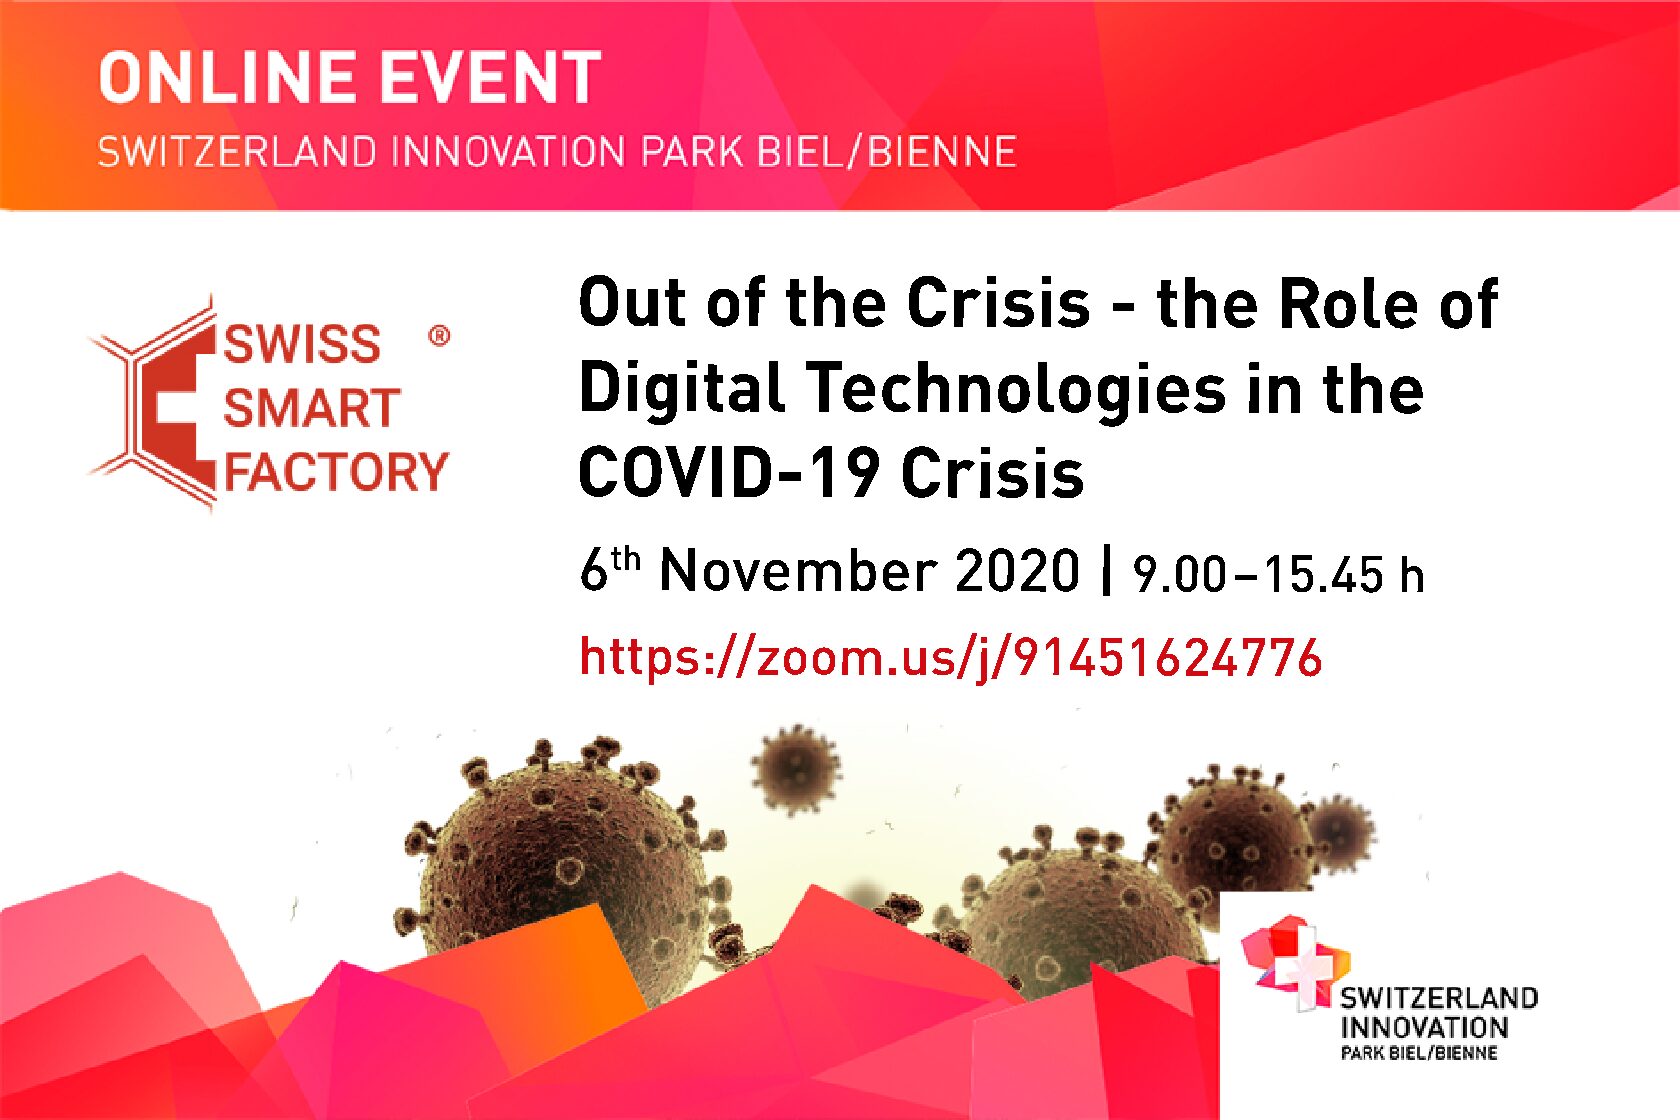 Virtual Event “Out of the crisis”